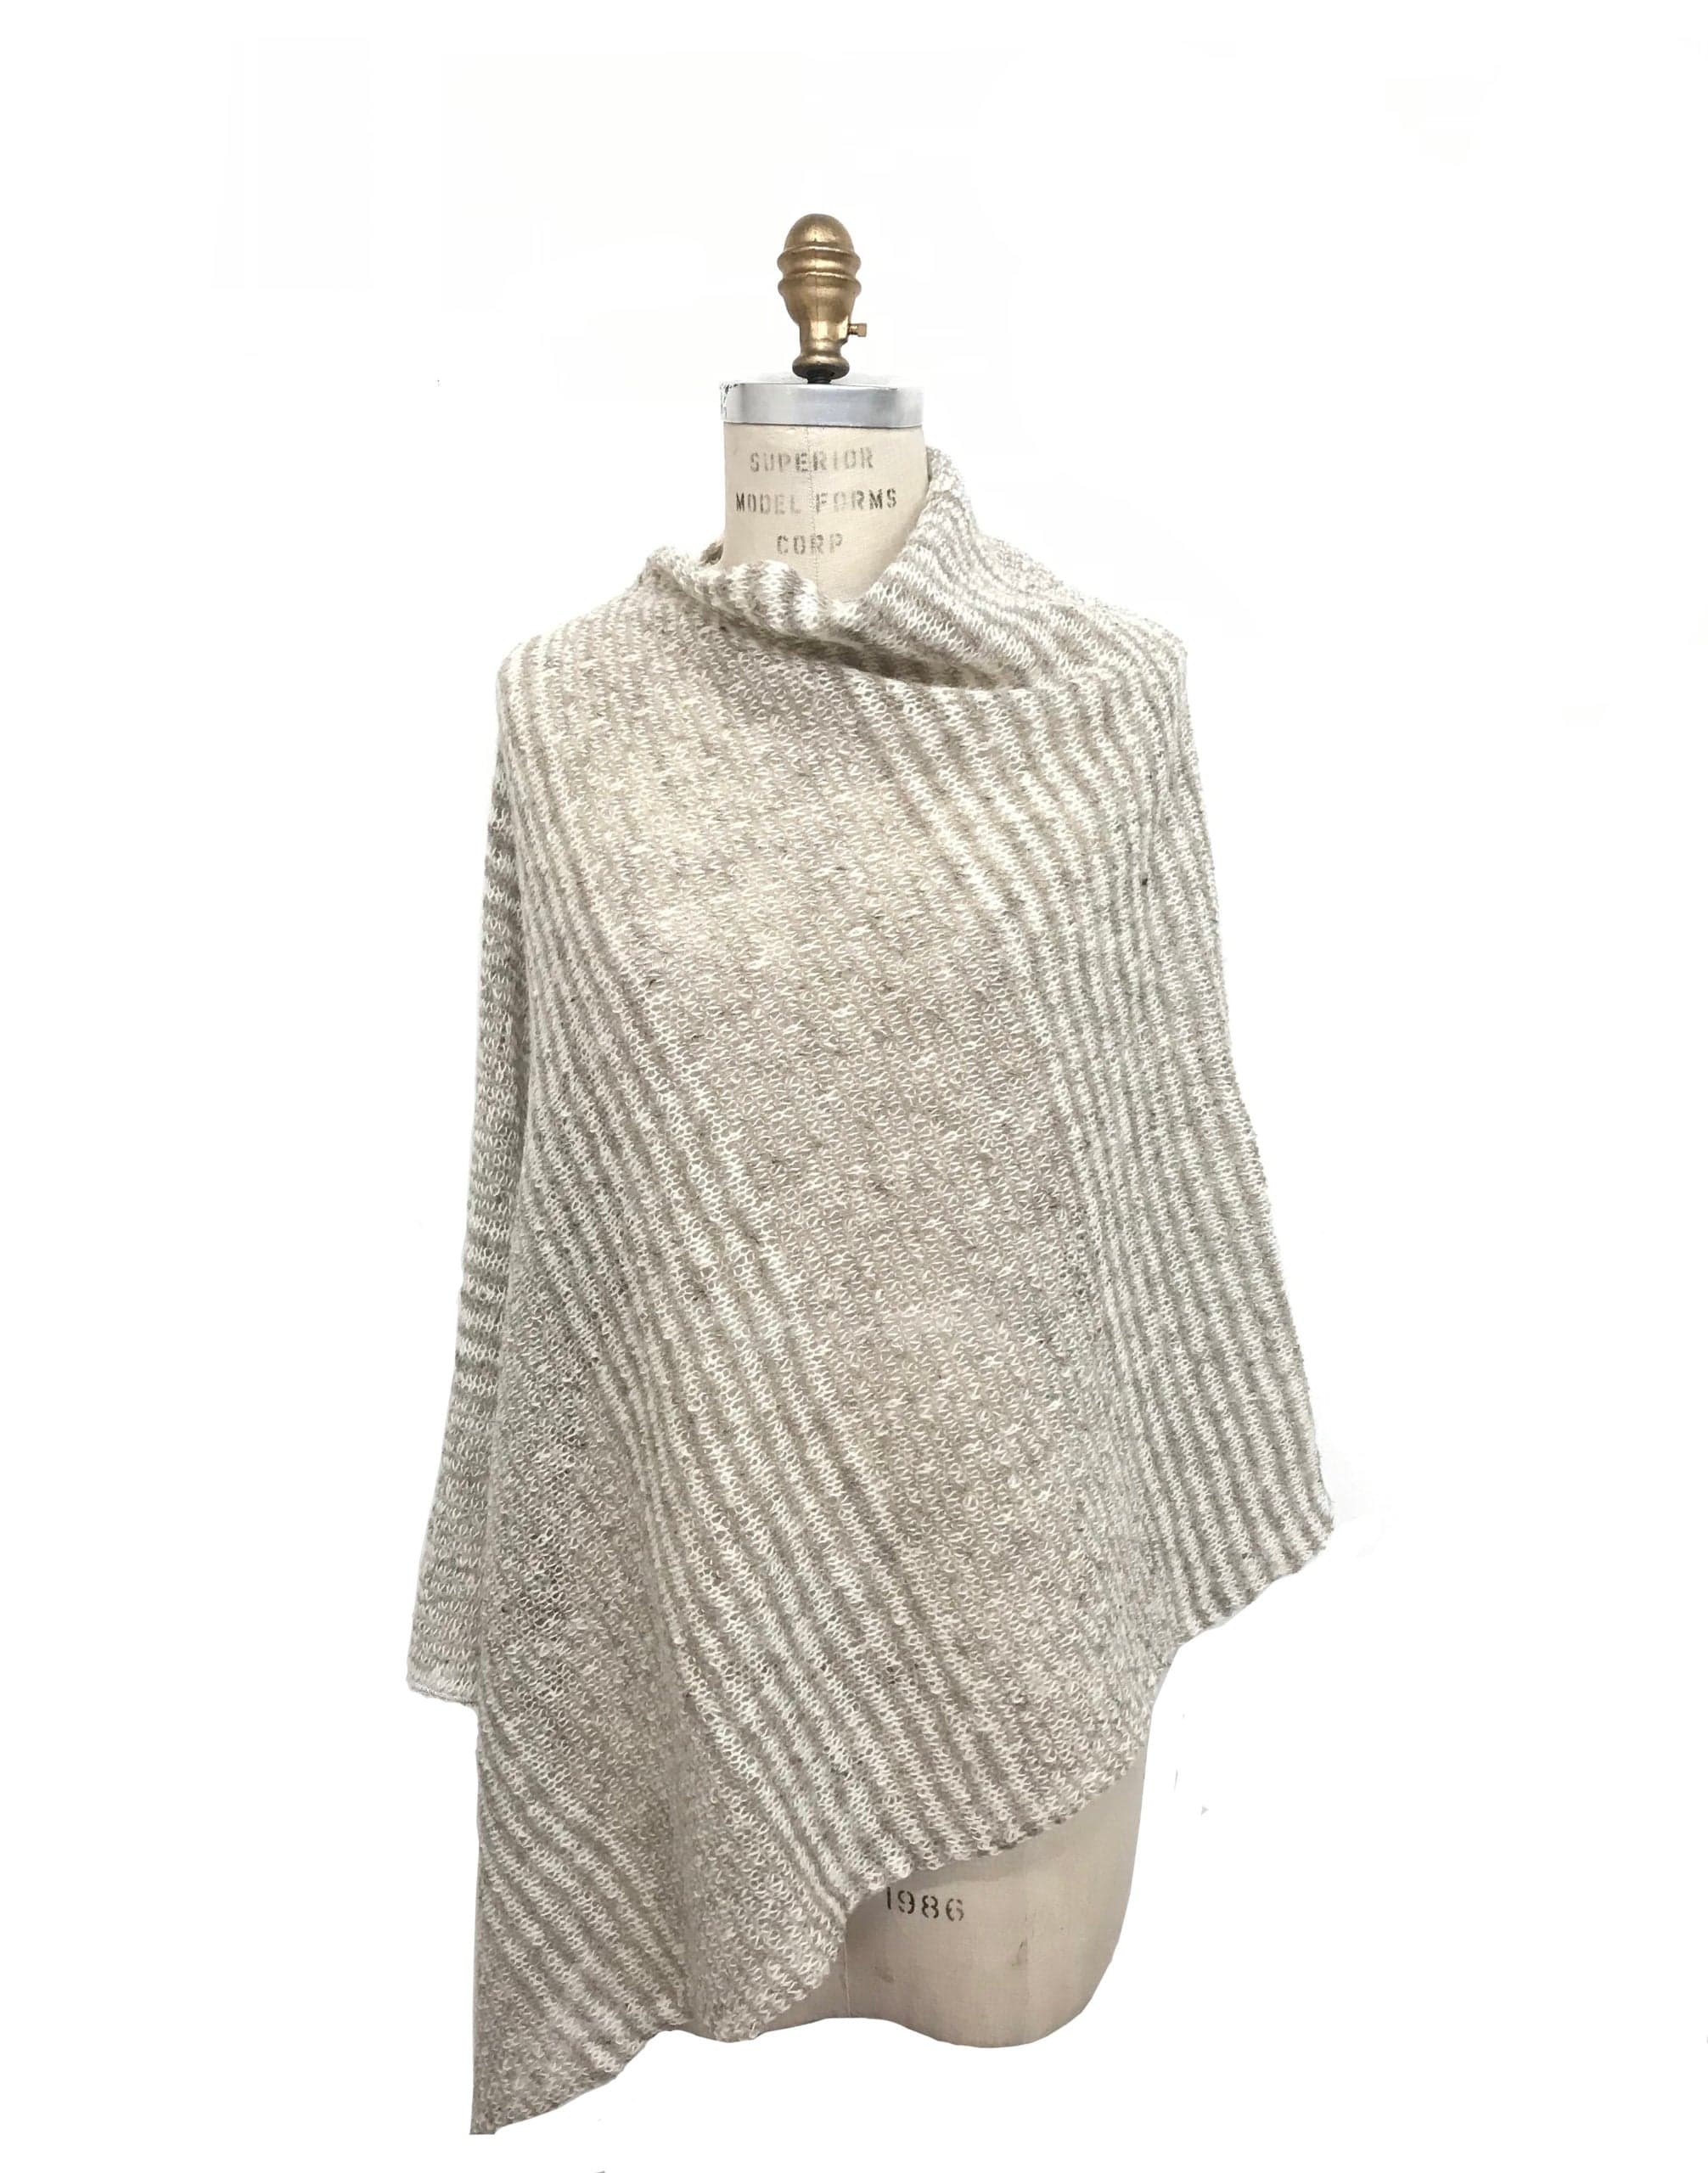 Light wool poncho from Iceland